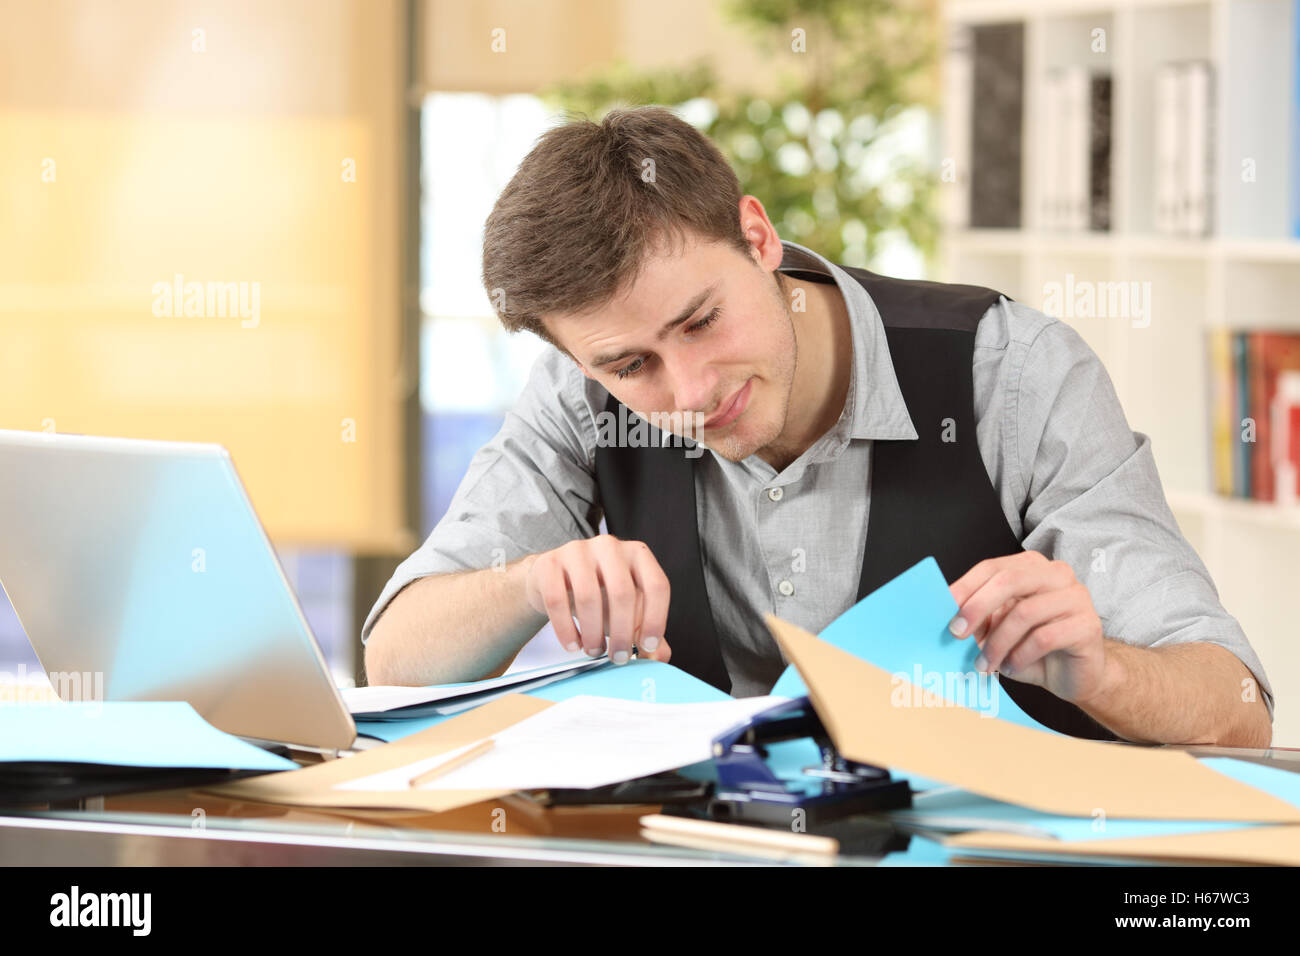 Incompetent messy businessman with disorganized desk searching lost documents at office Stock Photo